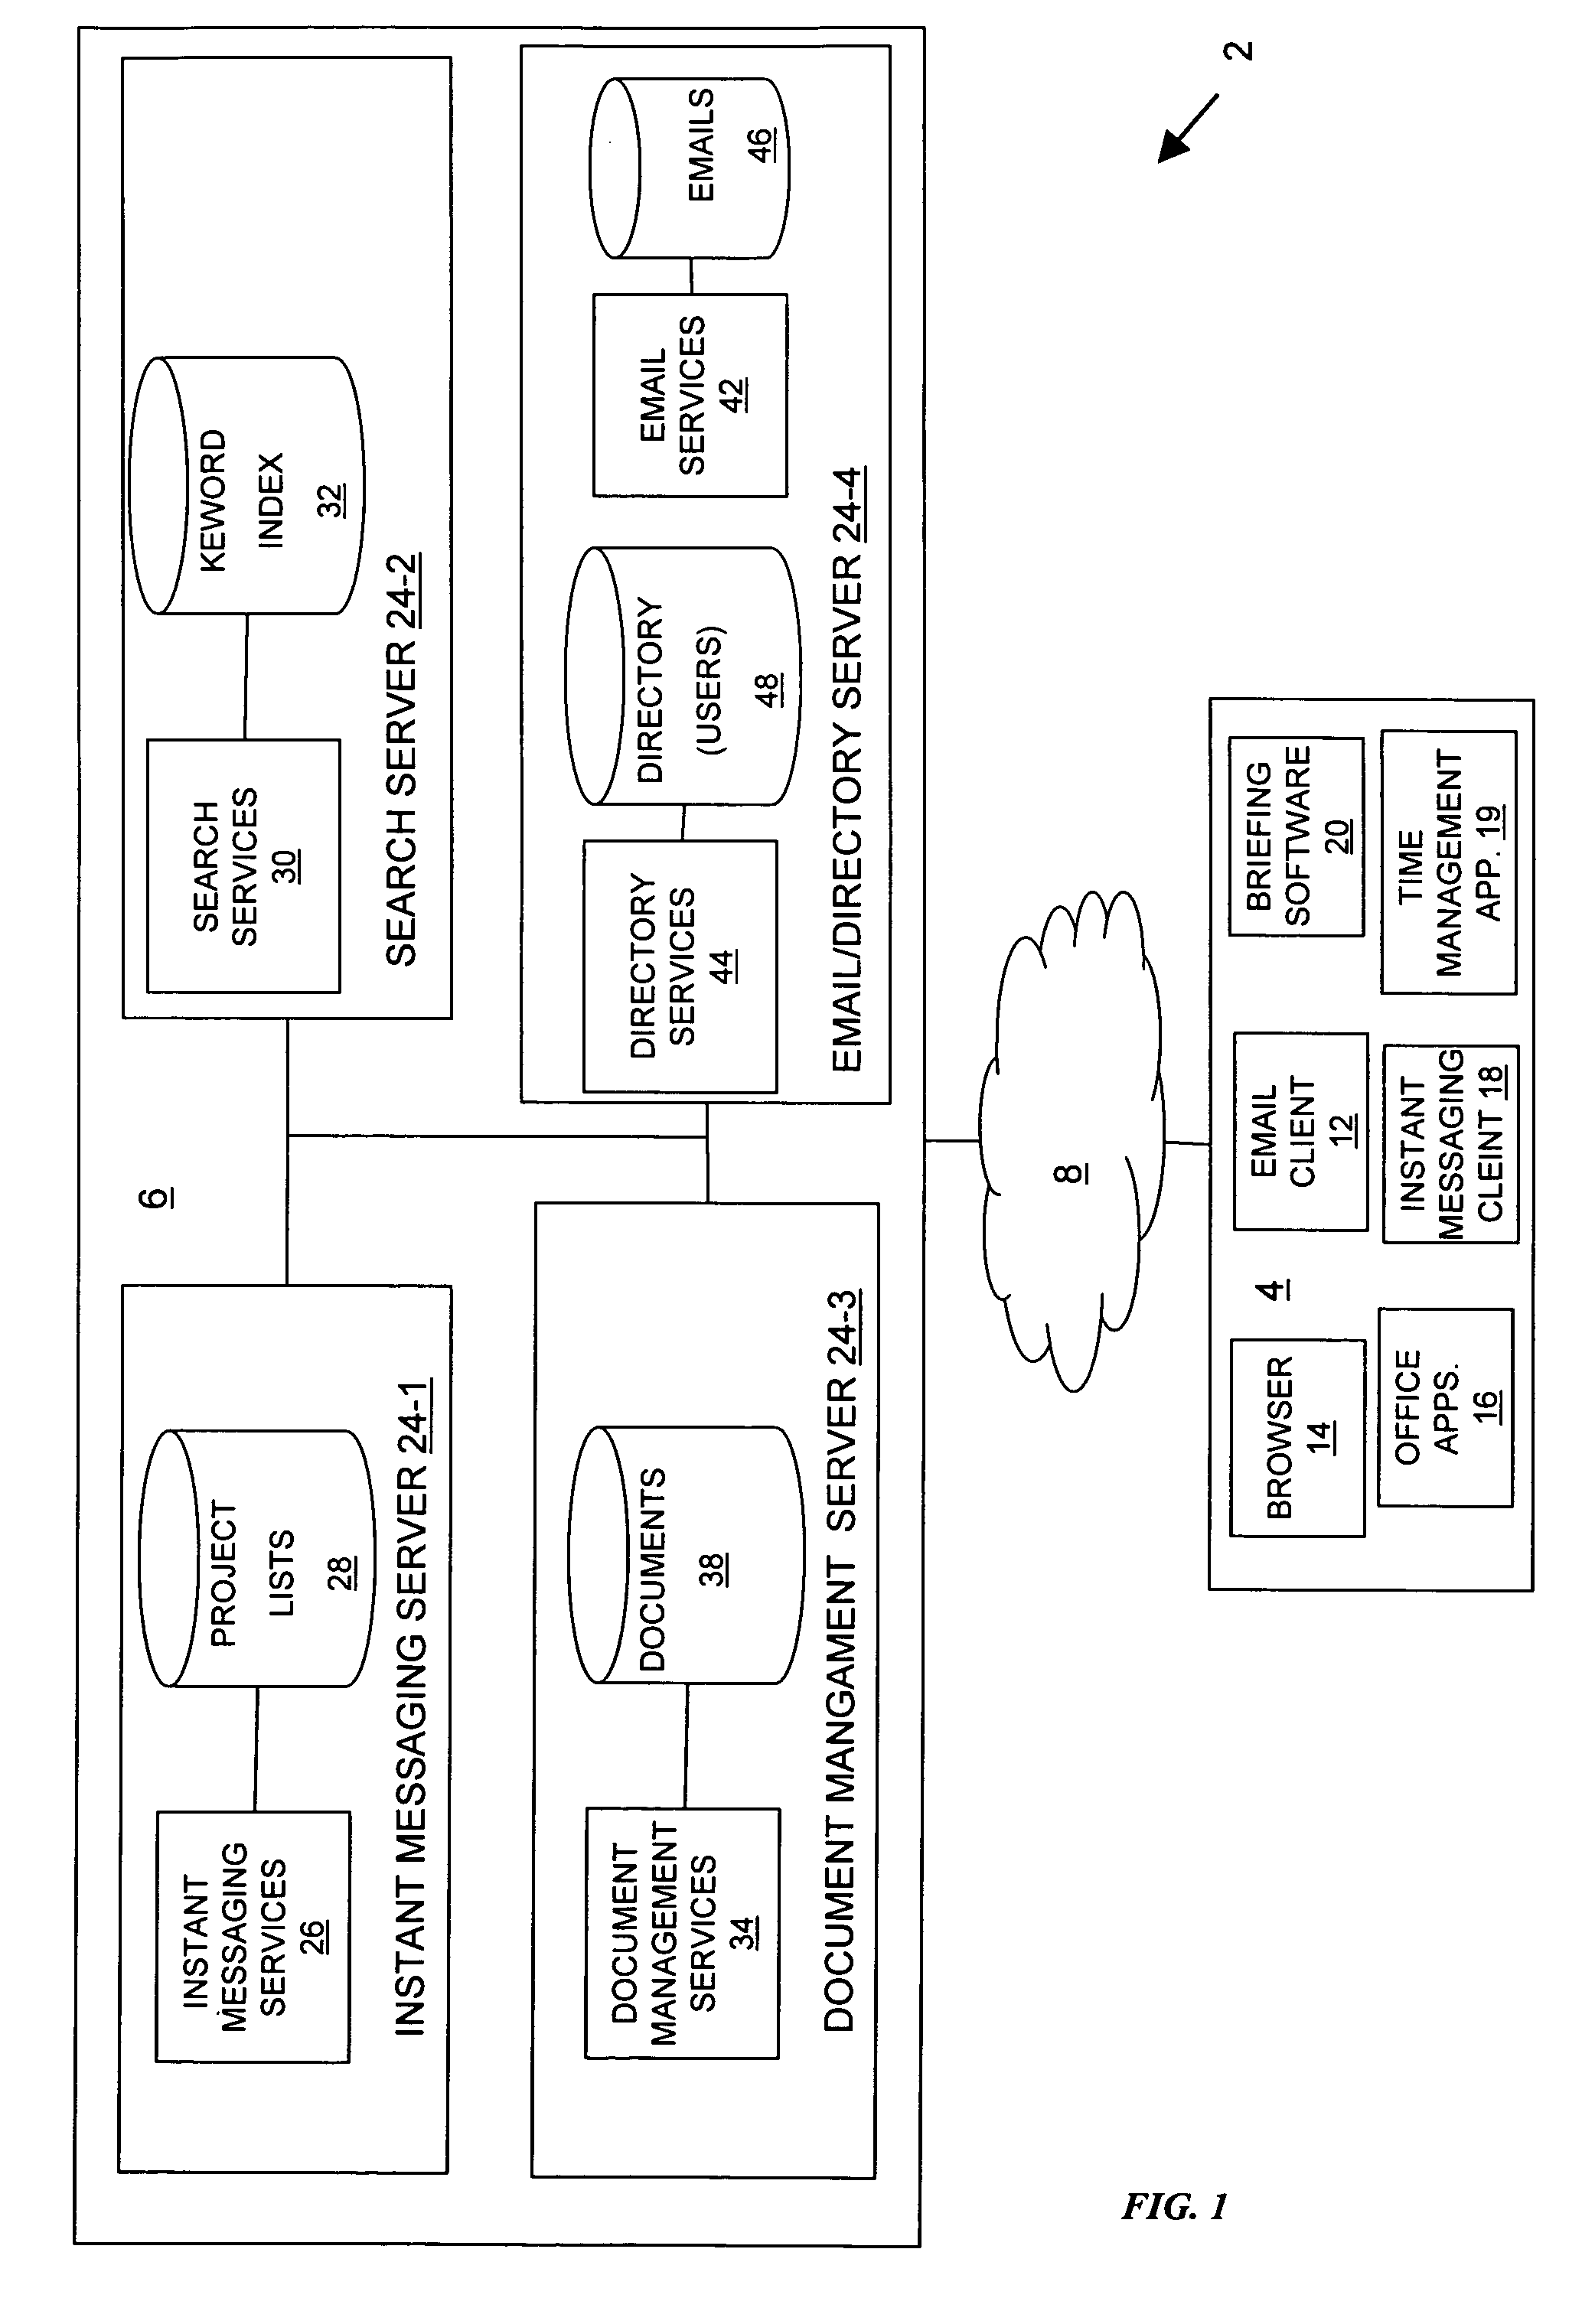 Method of generating a context-inferenced search query and of sorting a result of the query